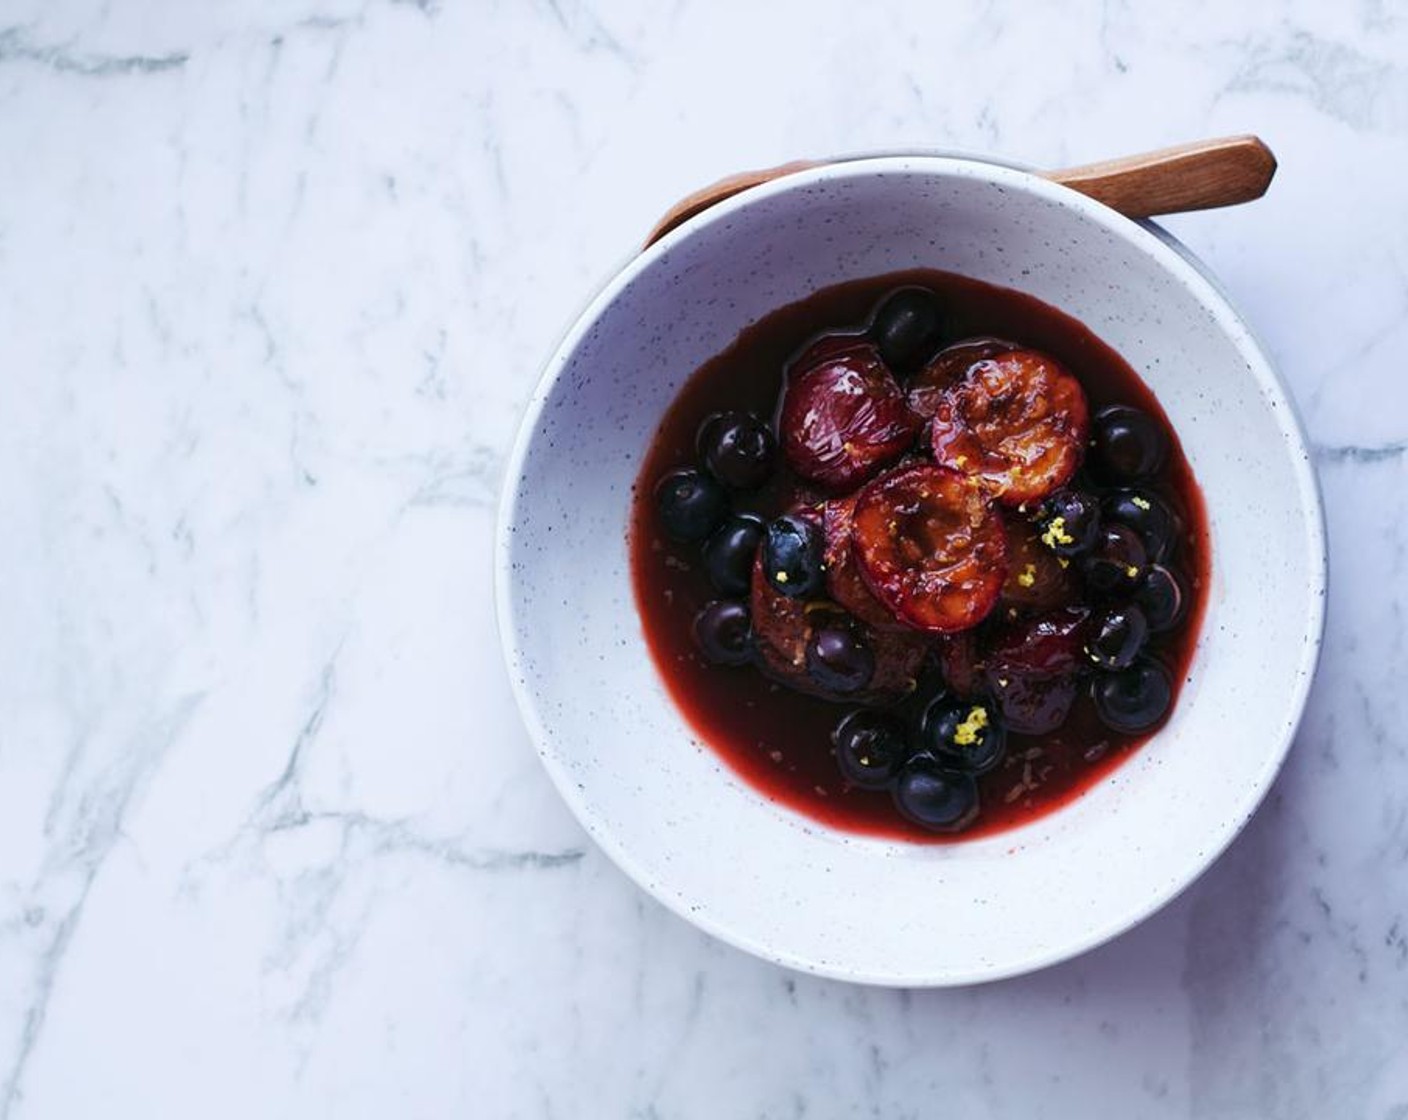 Plums in Vegan Balsamic Syrup with Blueberries